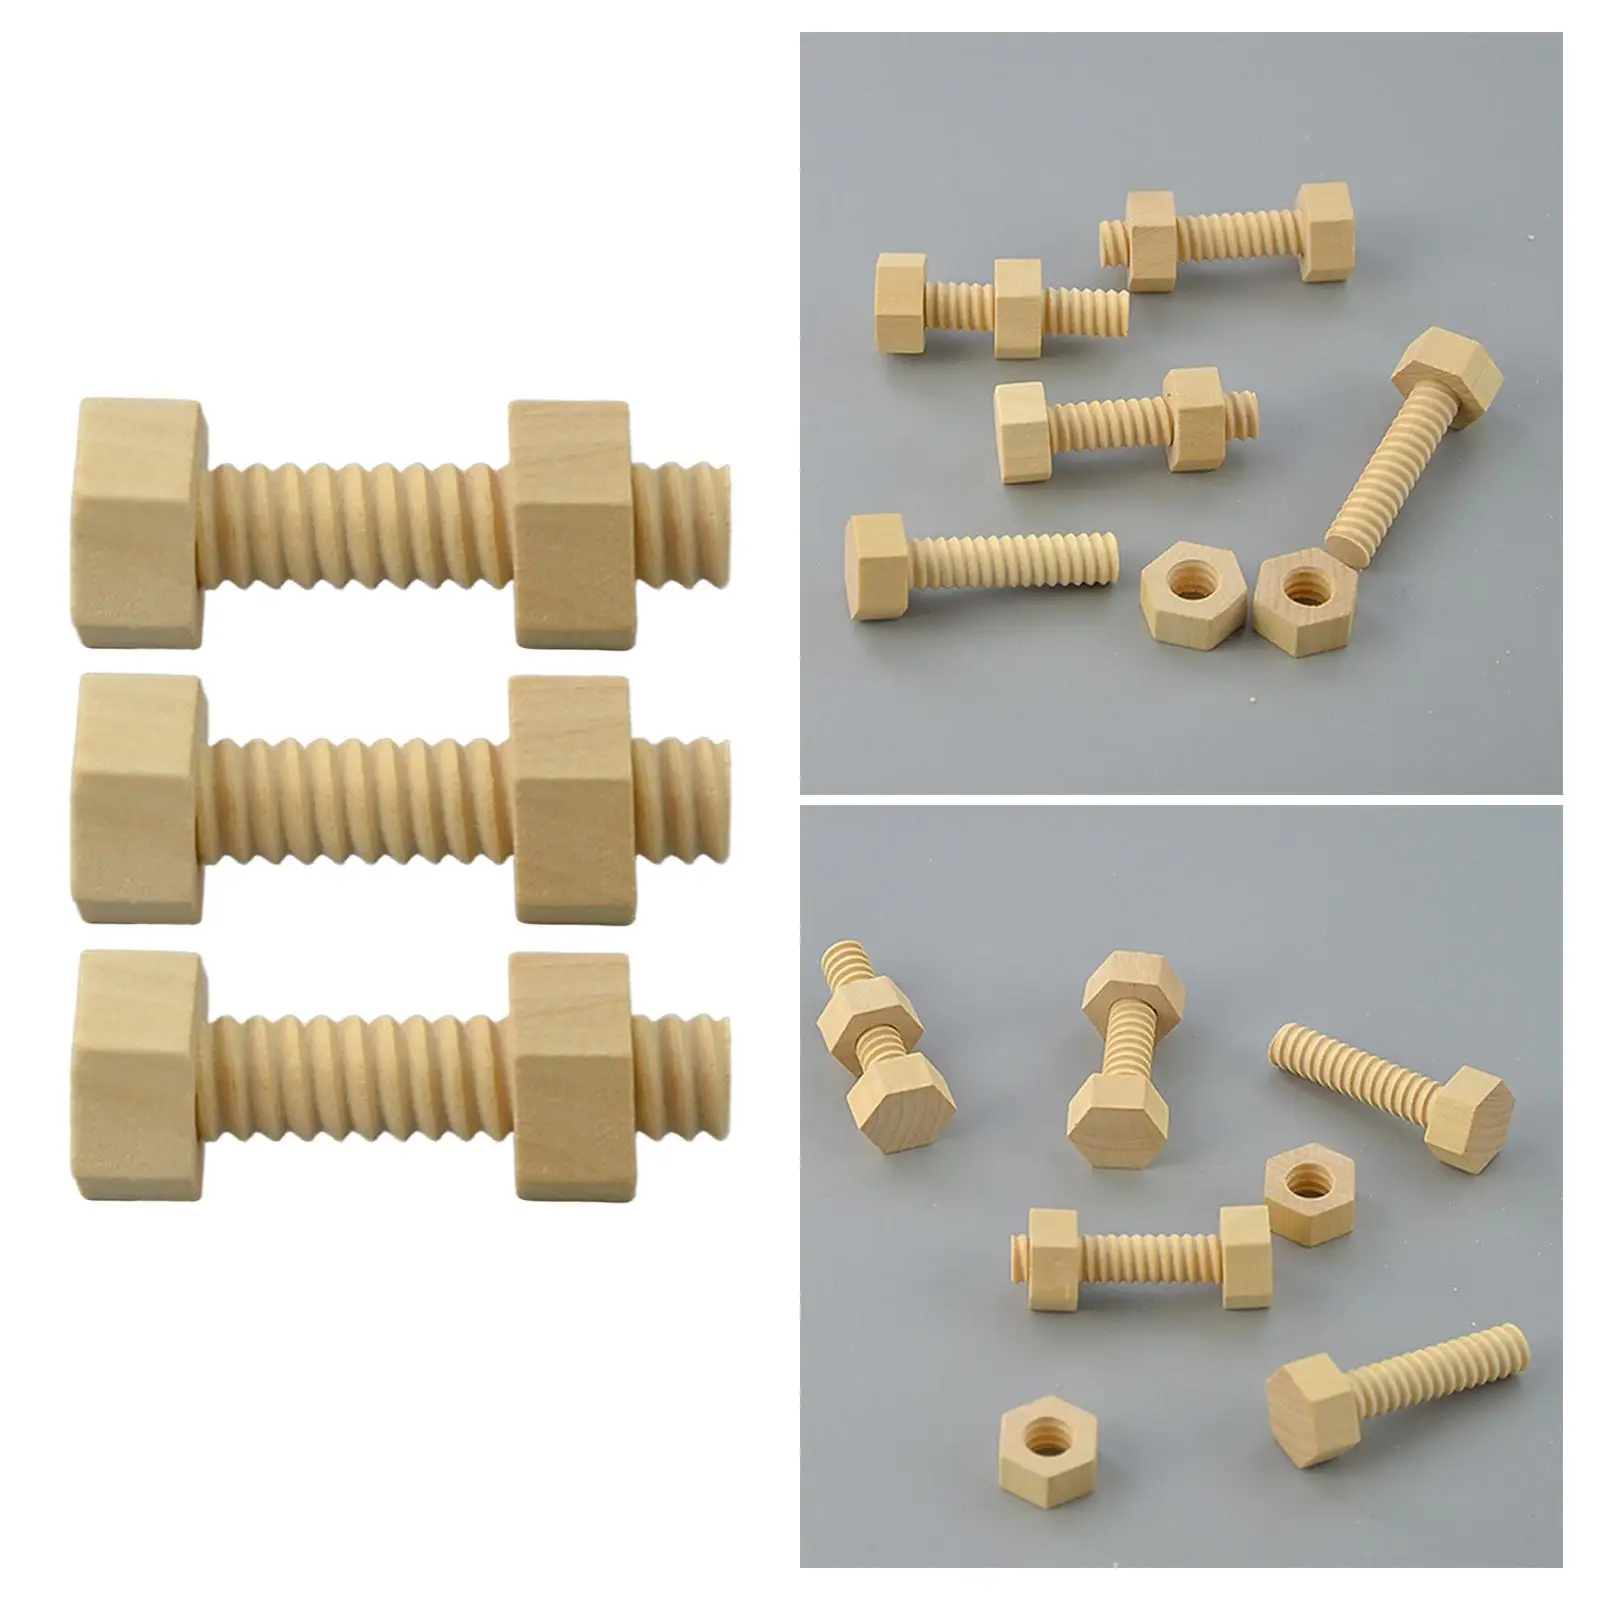 Screw Nut Assembly Toy Montessori Hands-on Building Block Accs for